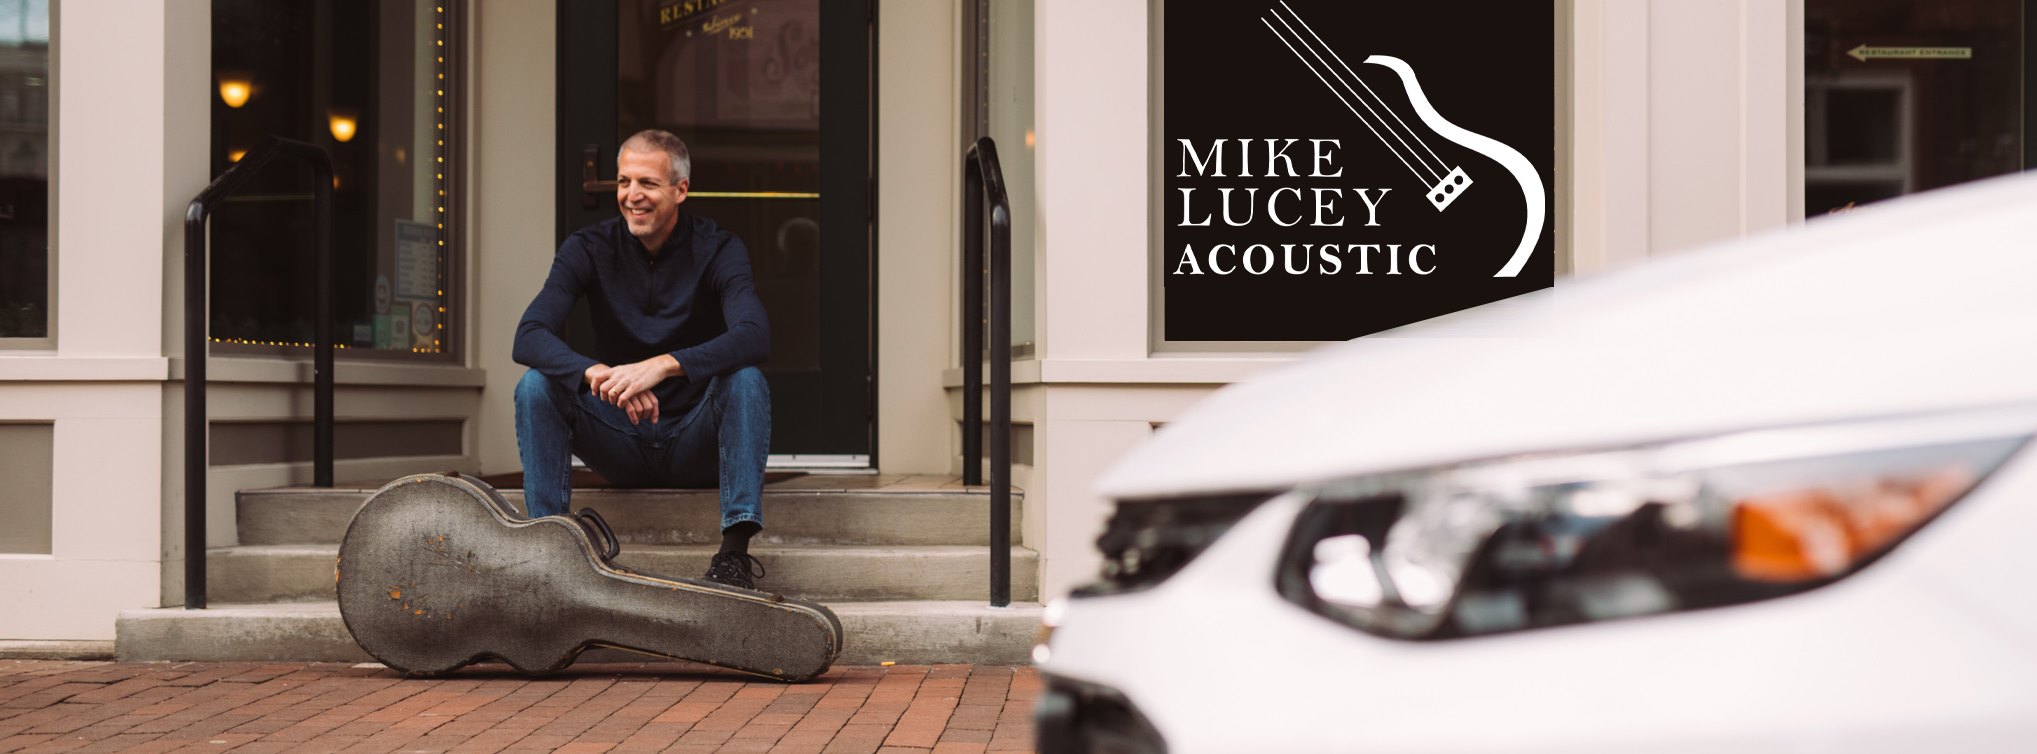 Mike Lucey Acoustic at Lyonsmith Brewing